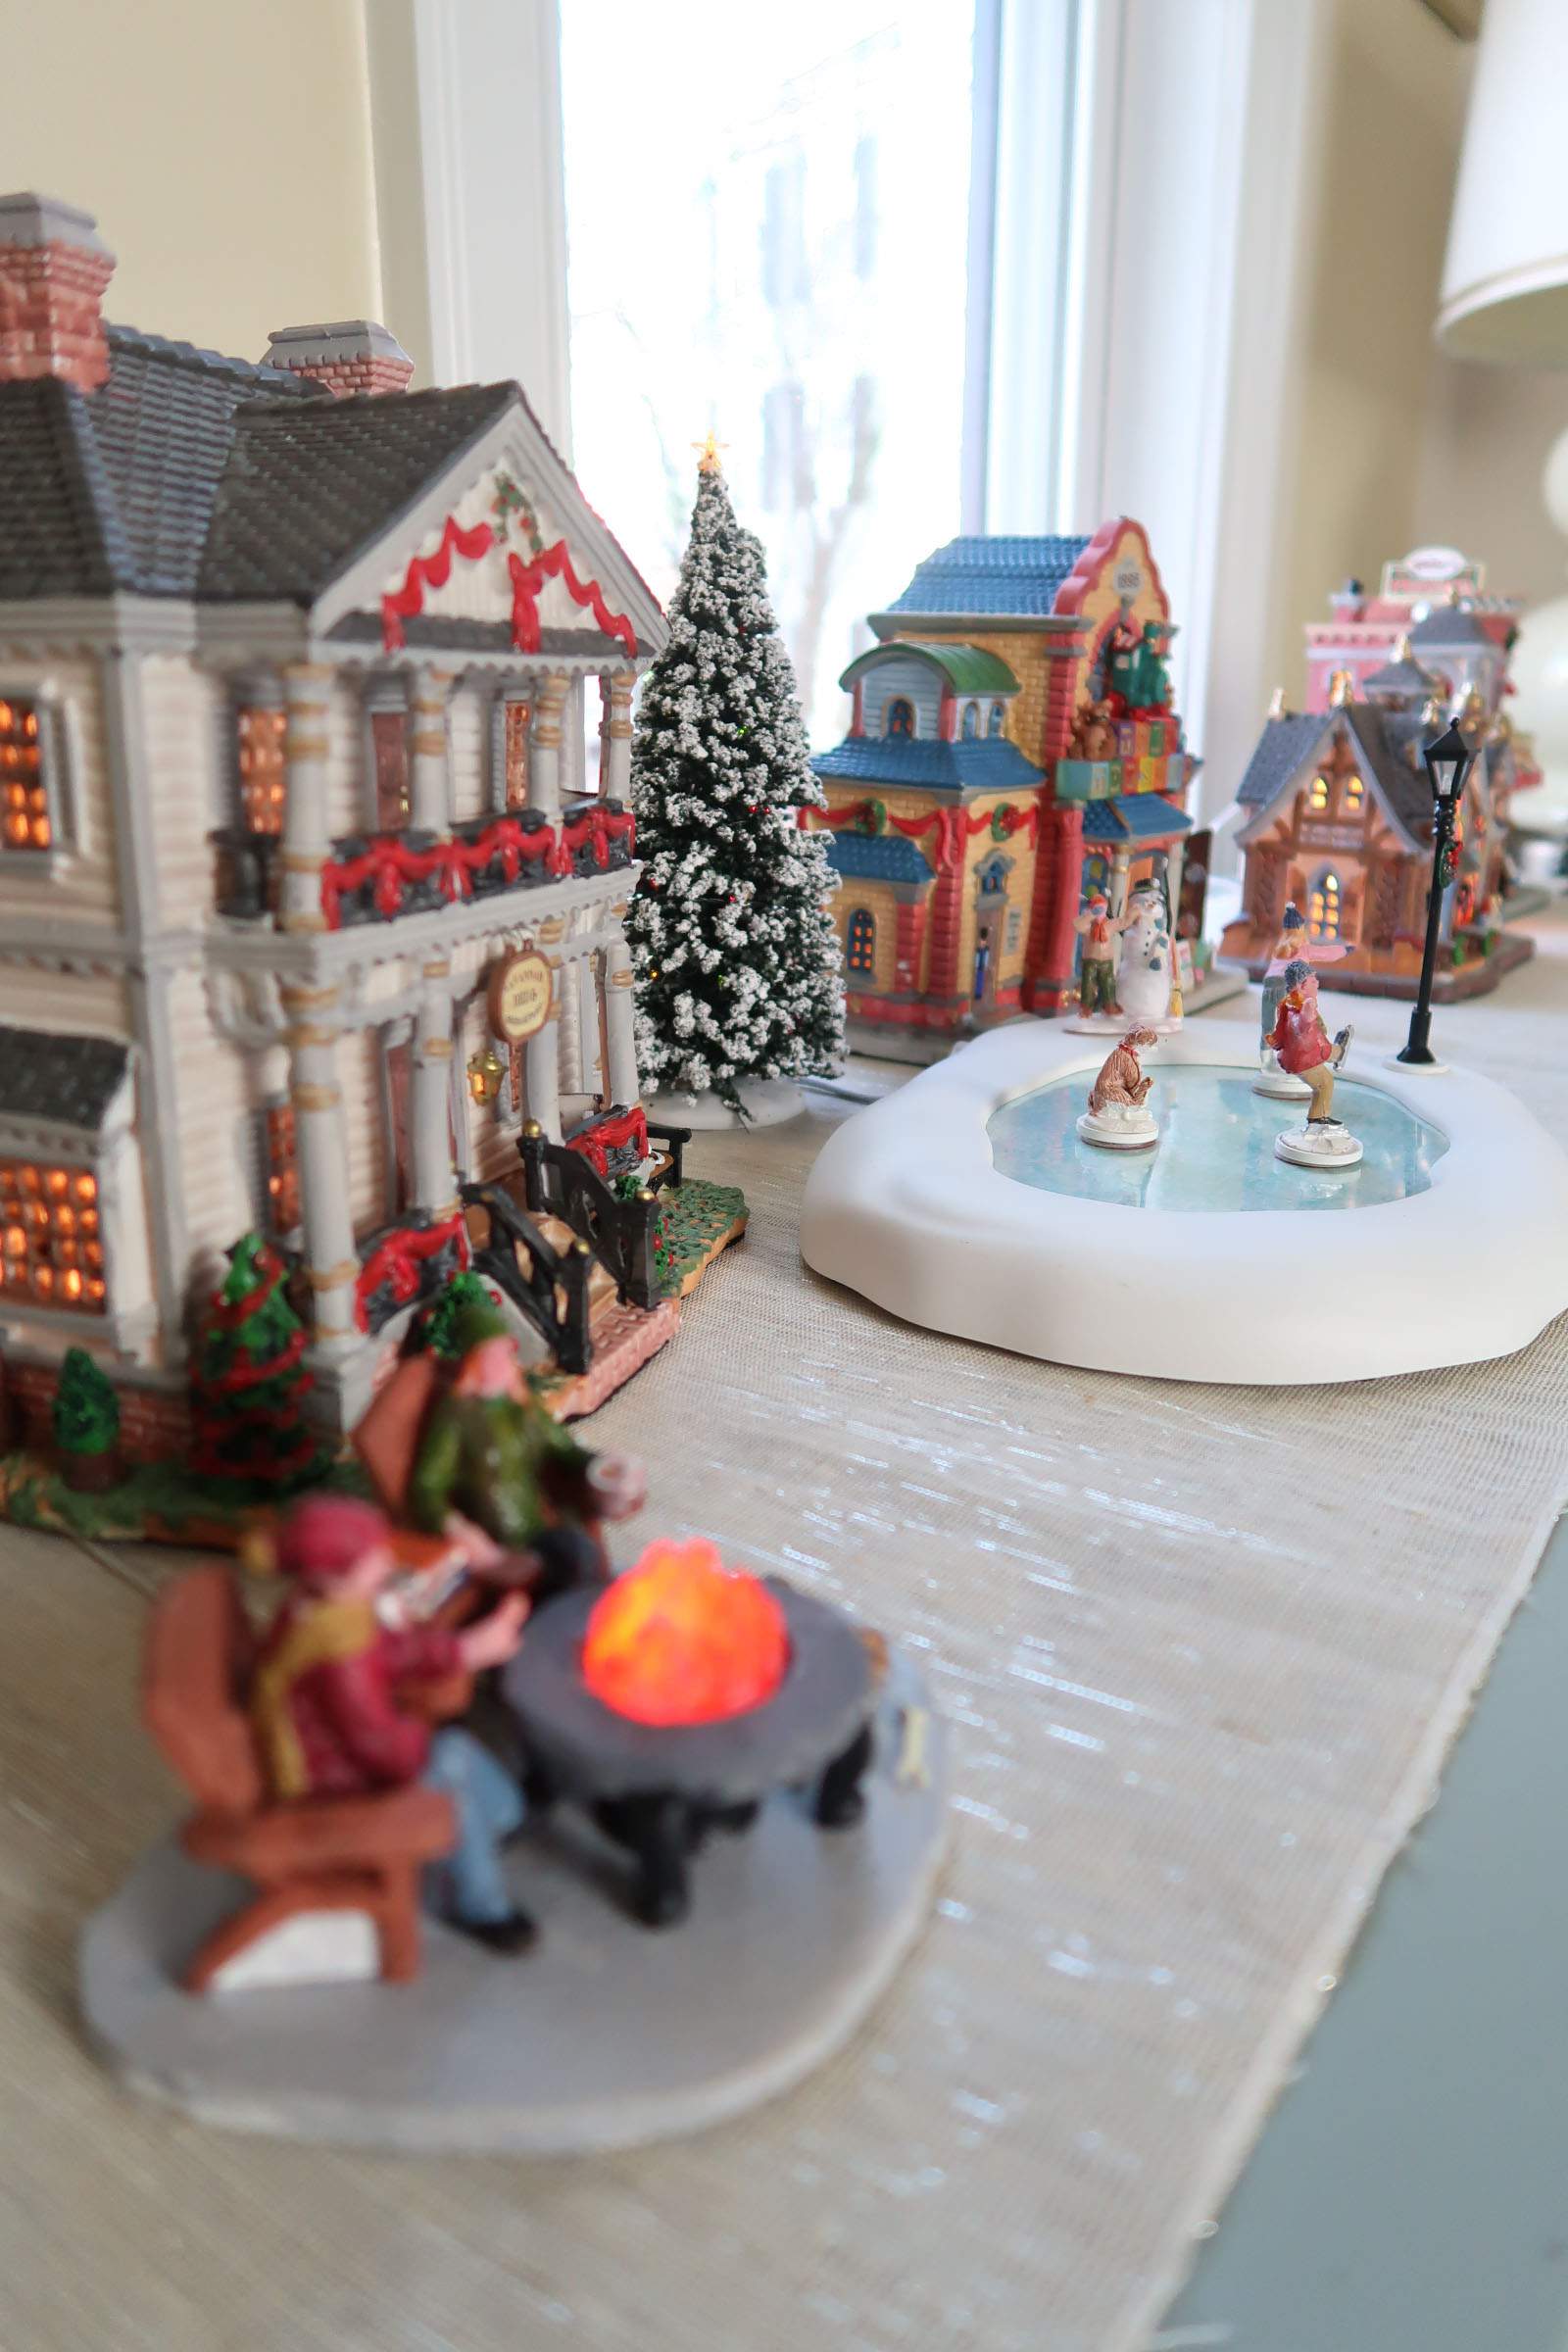 Scenes of the Christmas Village